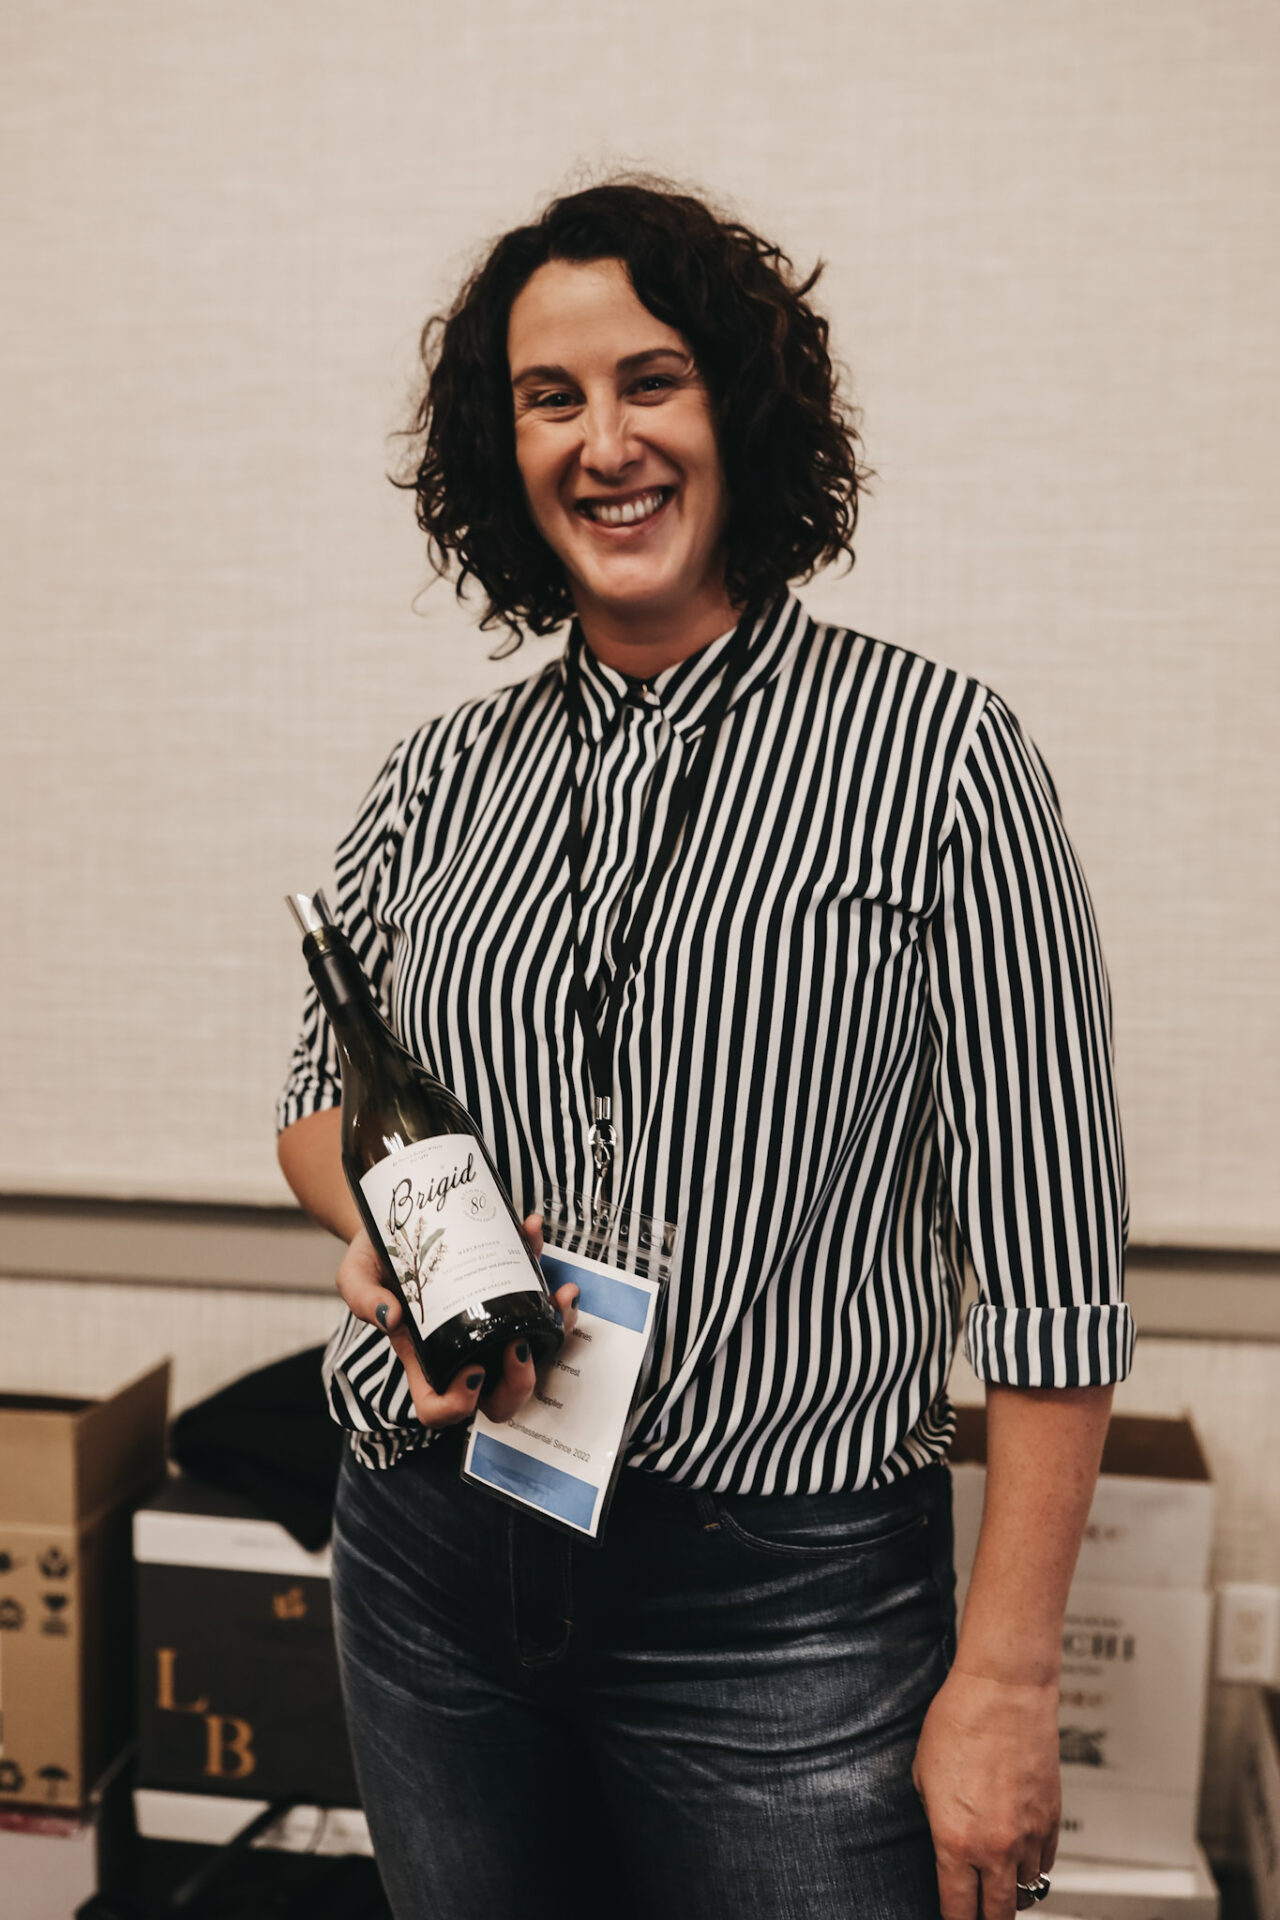 Beth Forrest of Forrest Wines holds a bottle of Brigid Sauvignon Blanc